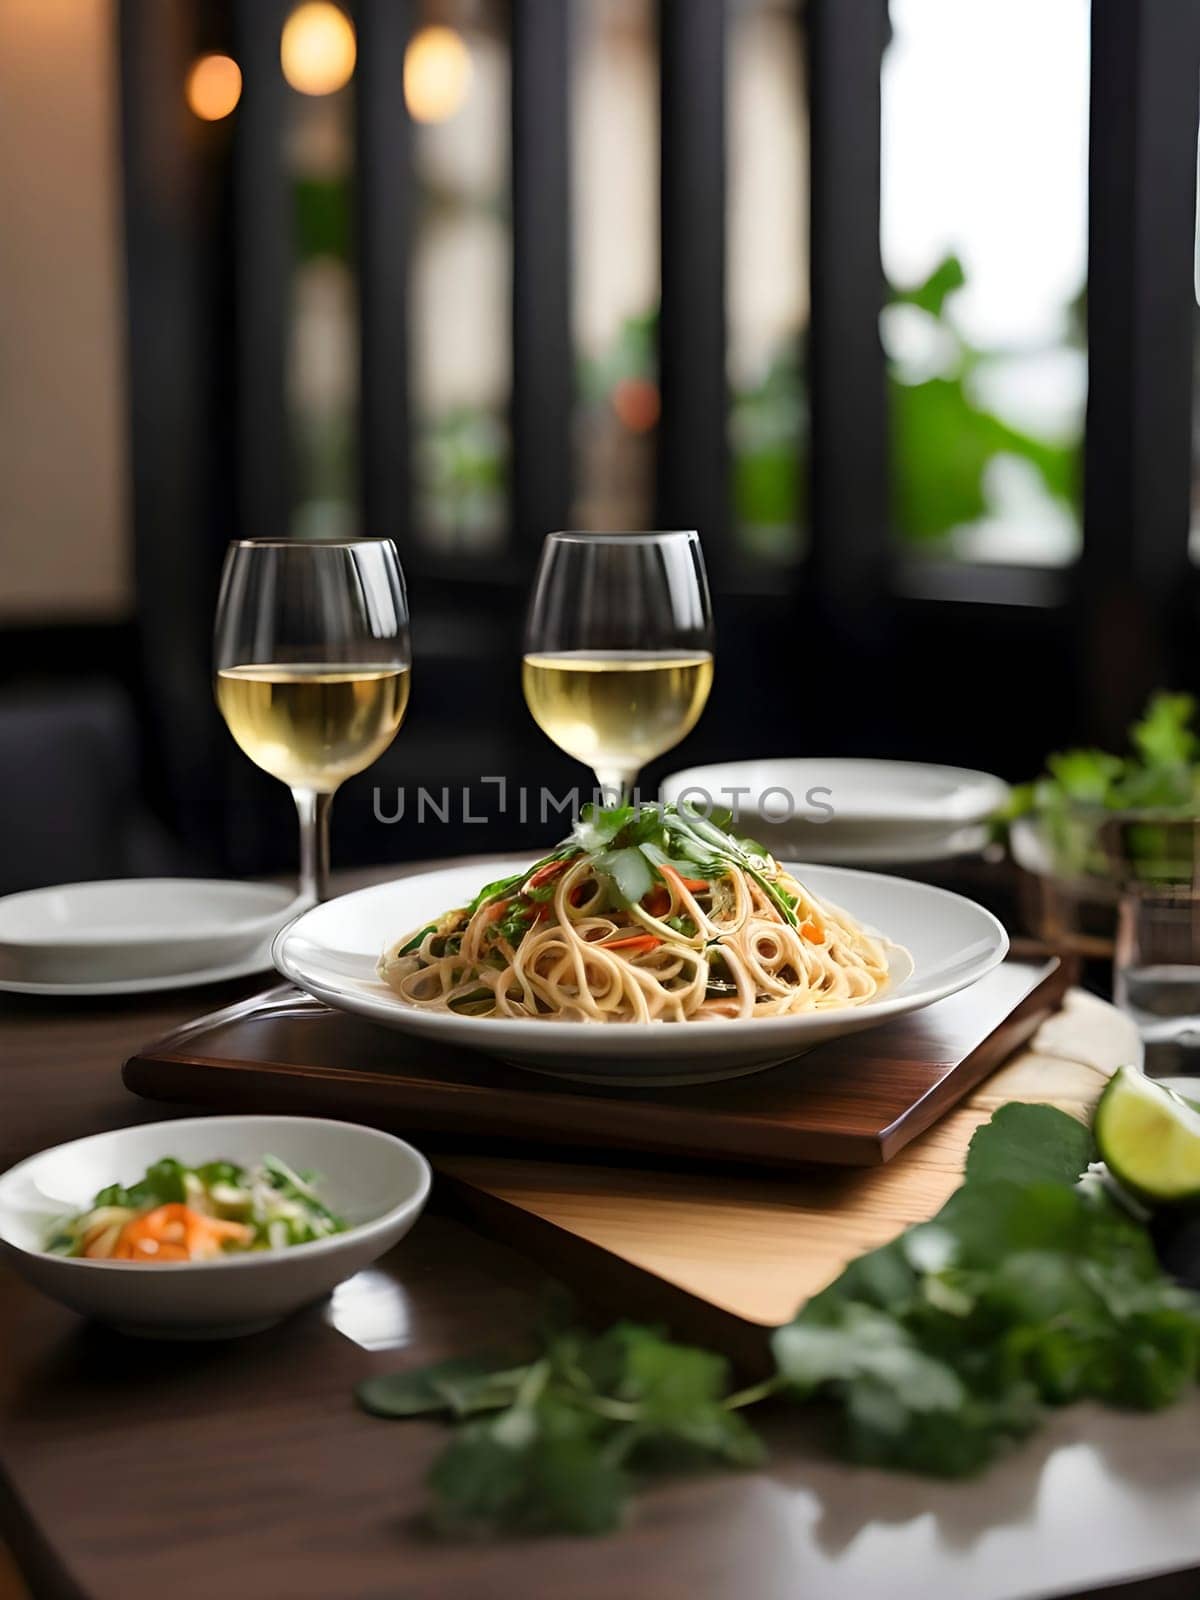 Dining Elegance. Thai Pad Noodles, White Wine, and Impeccable Service in High-Resolution.